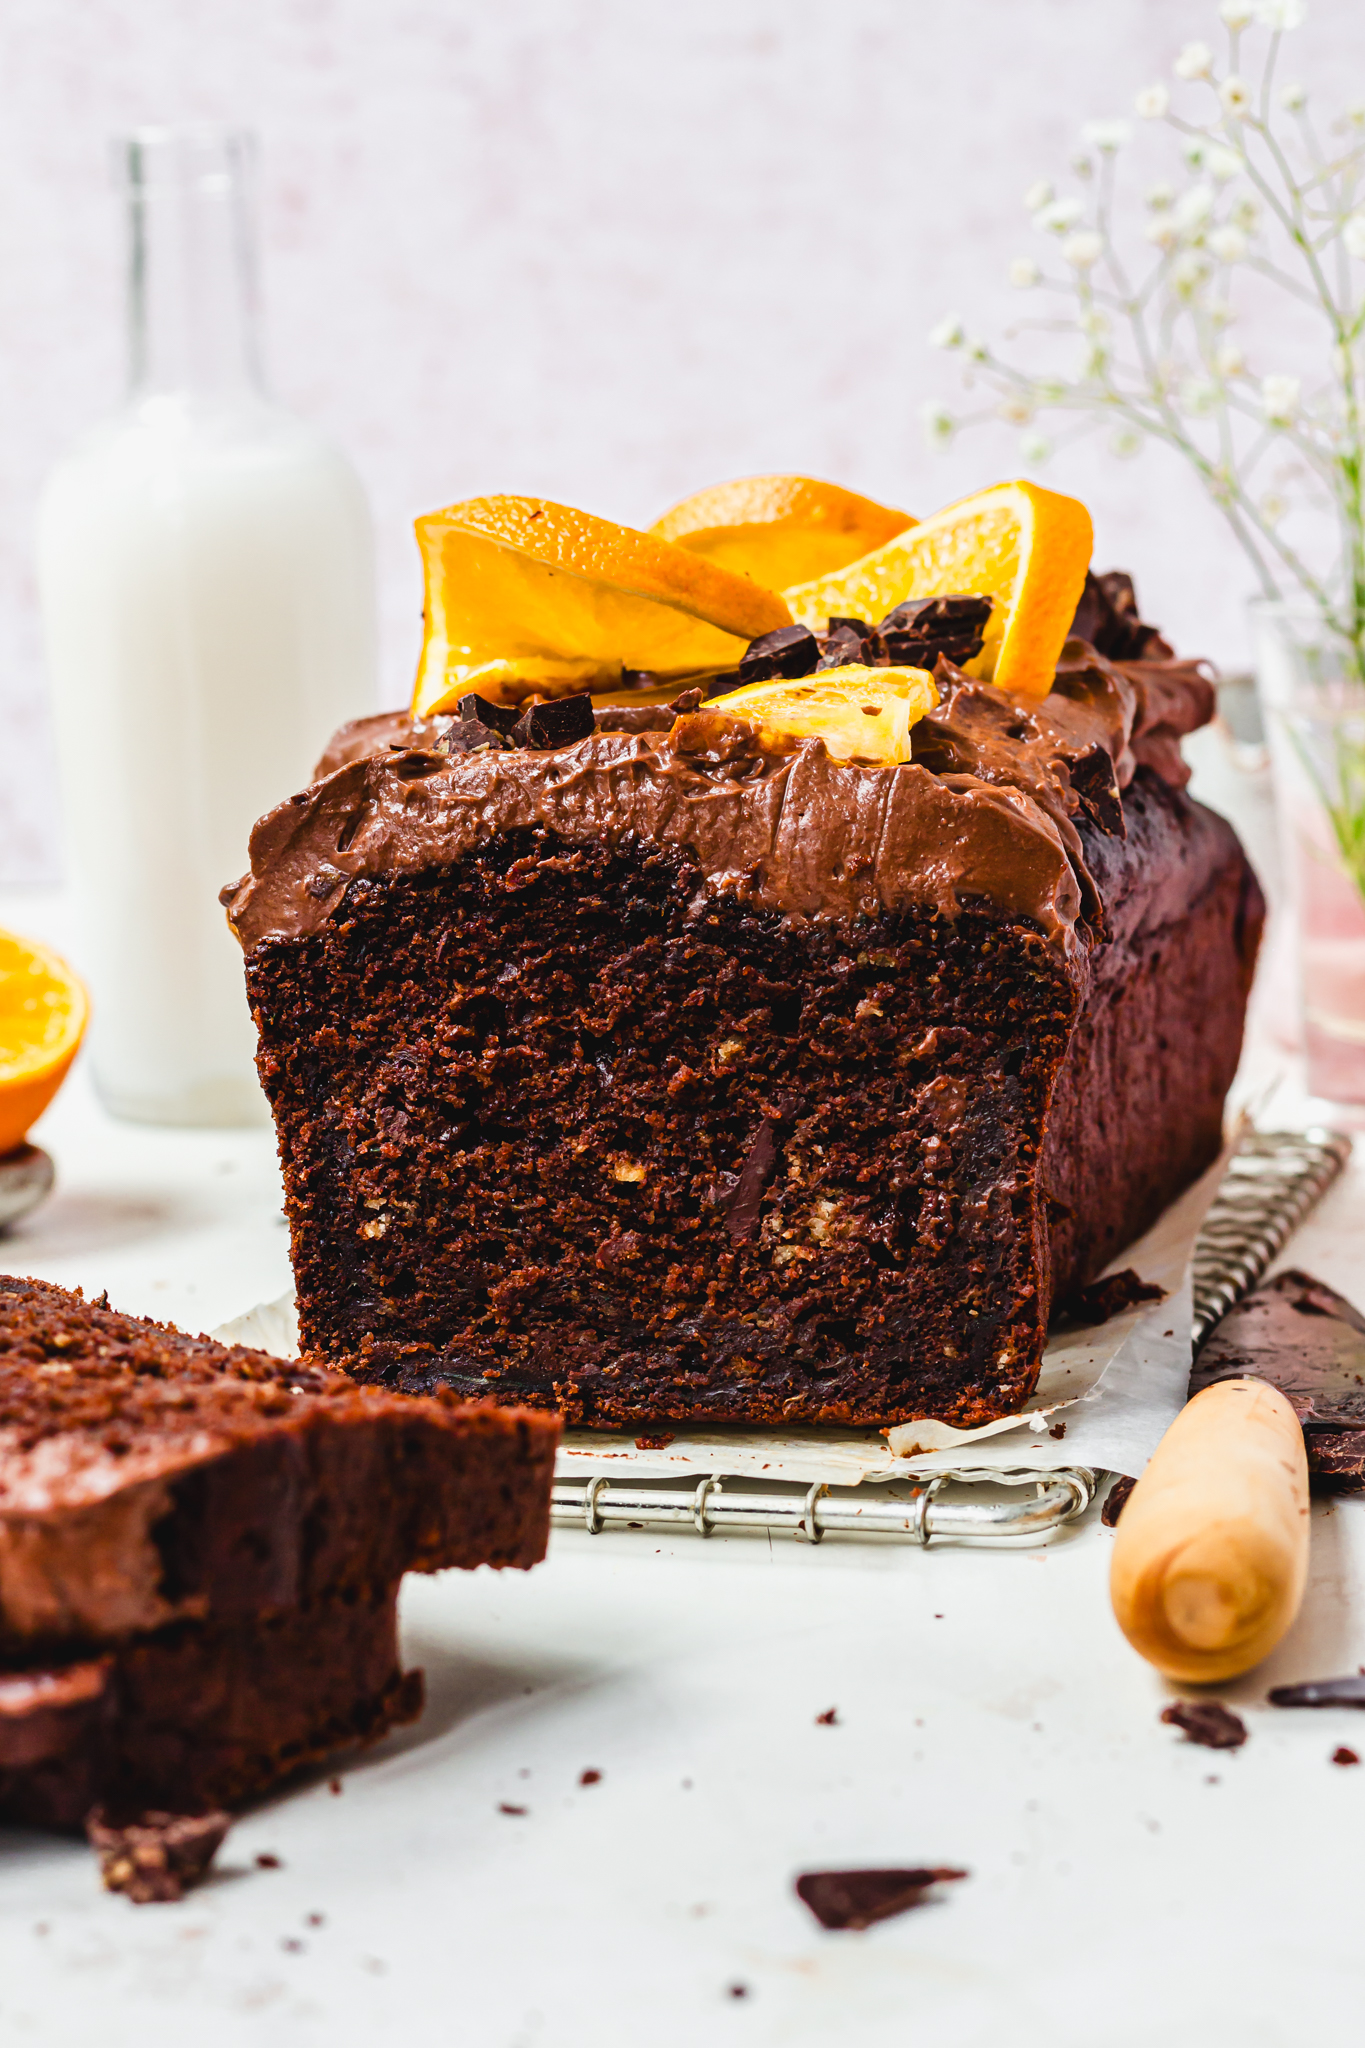 A Double Chocolate Orange Courgette Loaf Cake on a wire rack with a knife